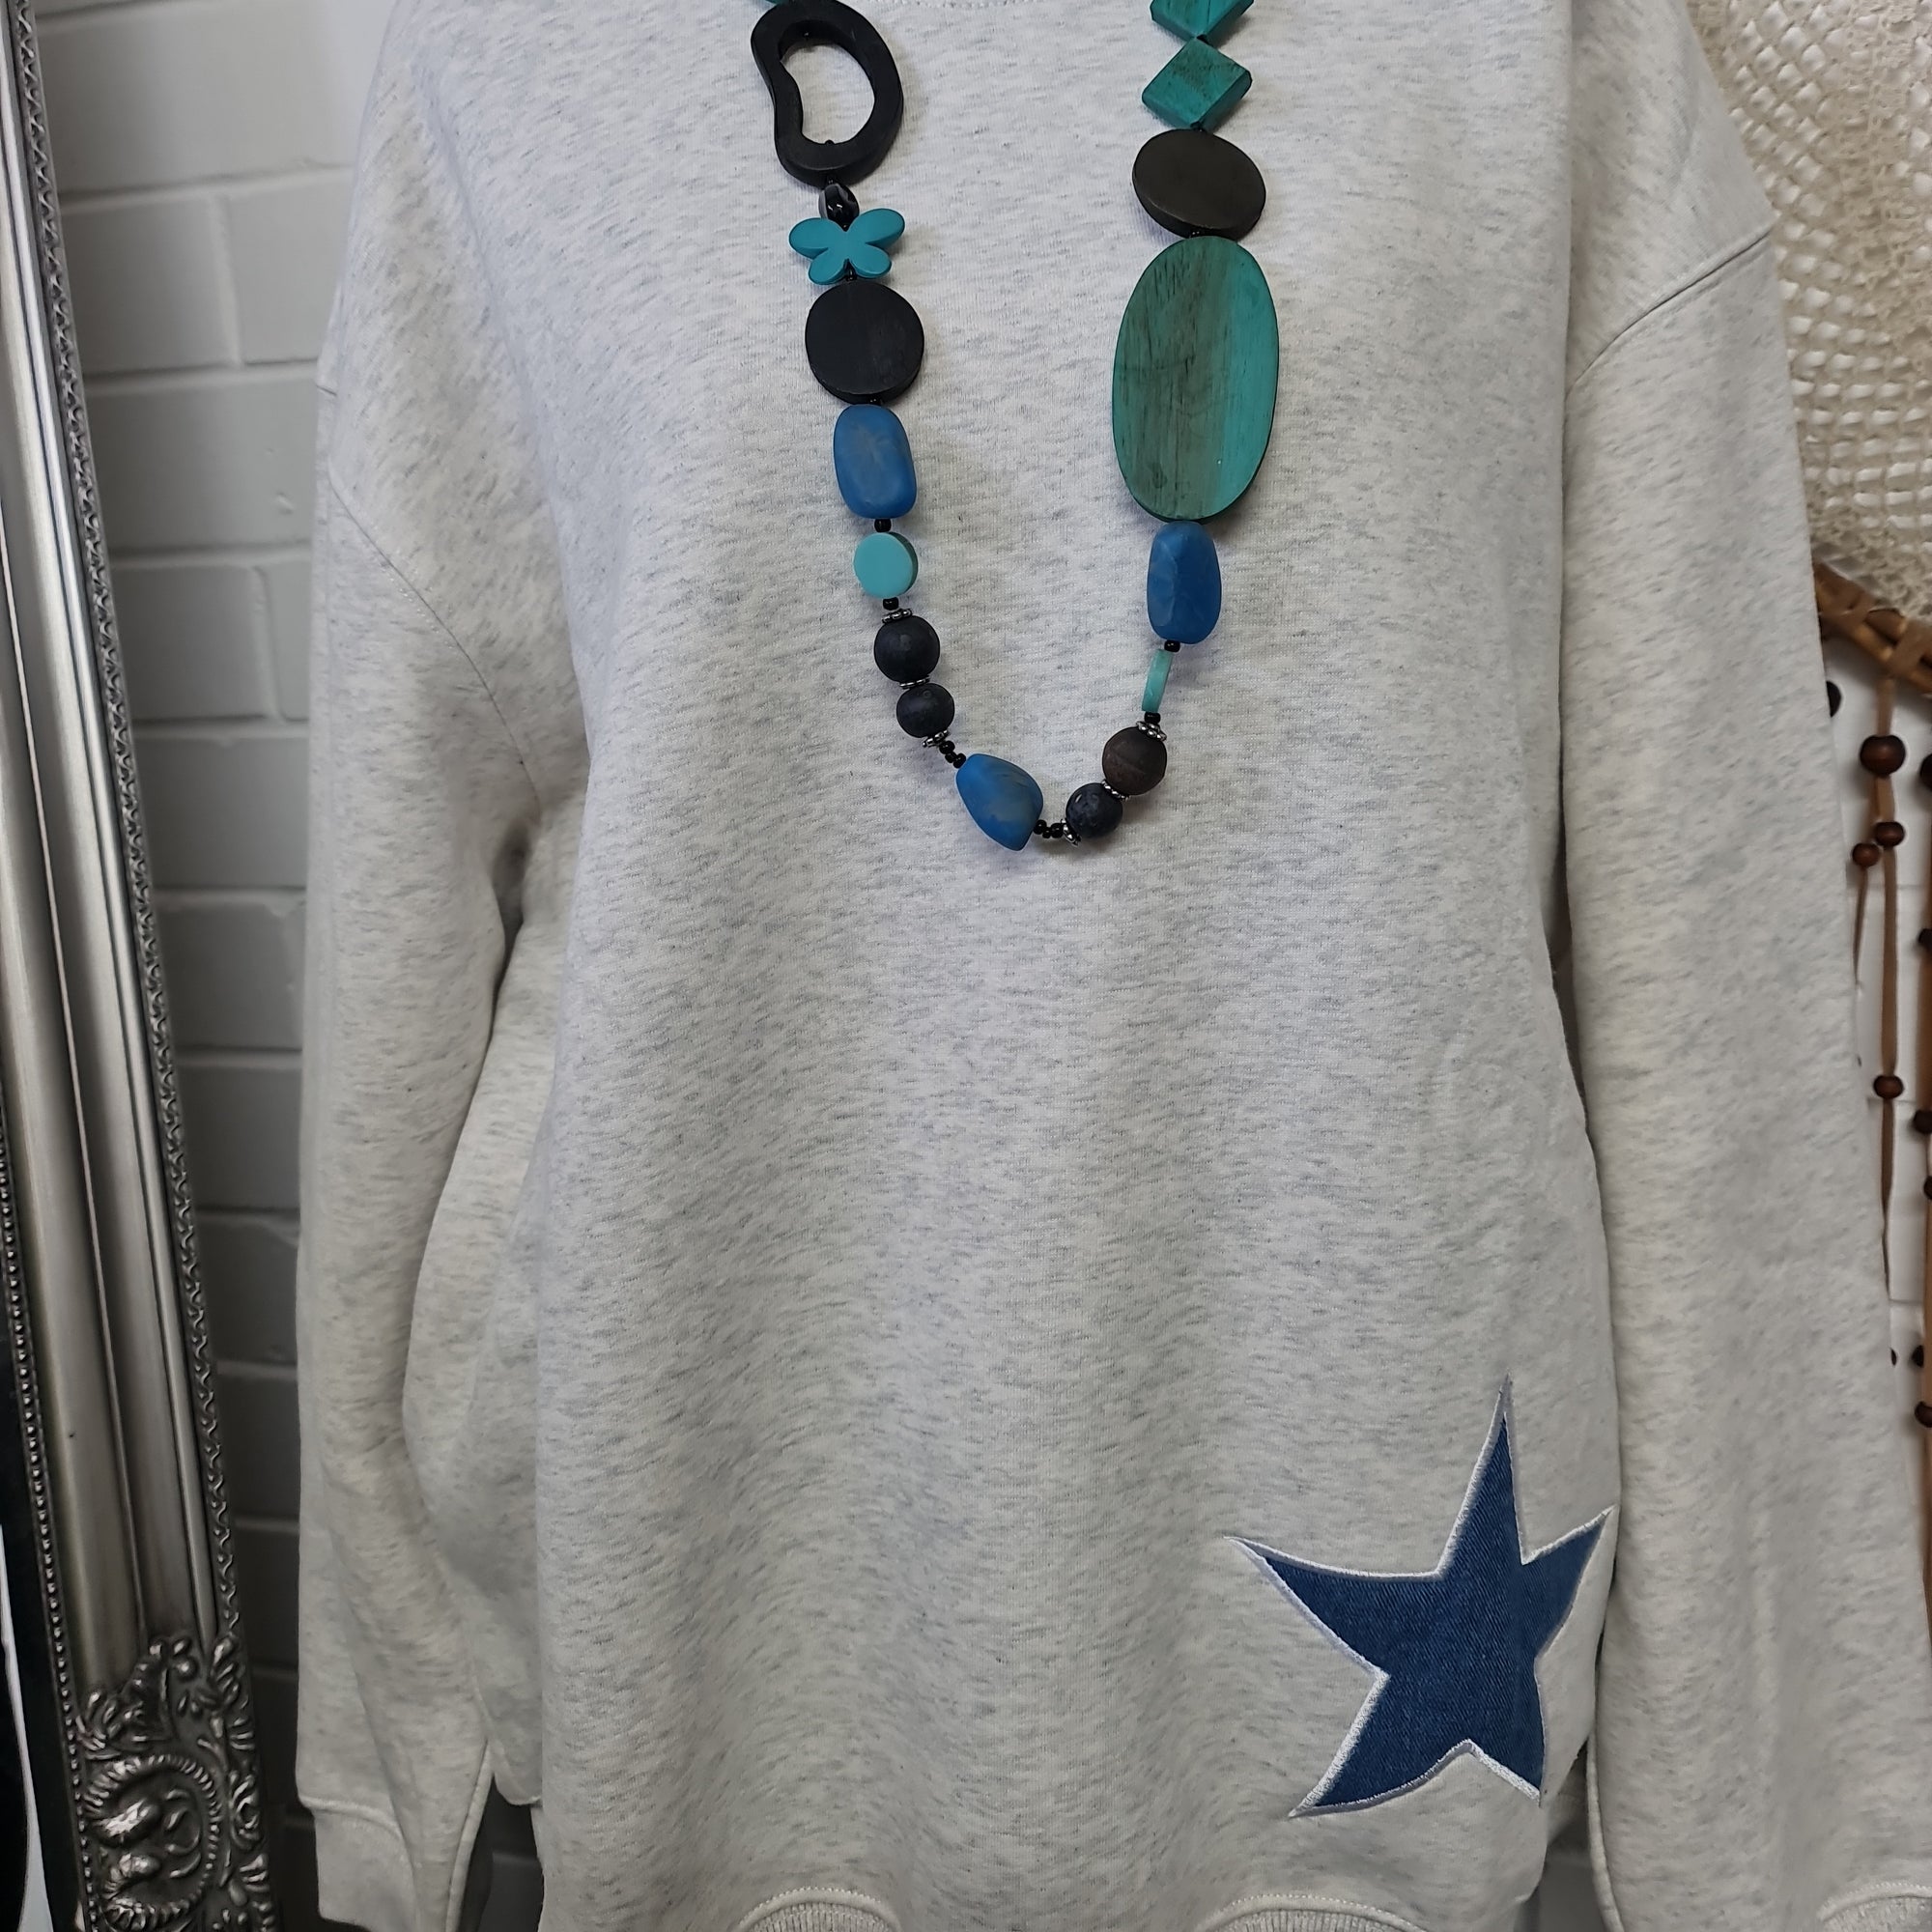 AMYIC STAR EMBROIDERY JUMPER